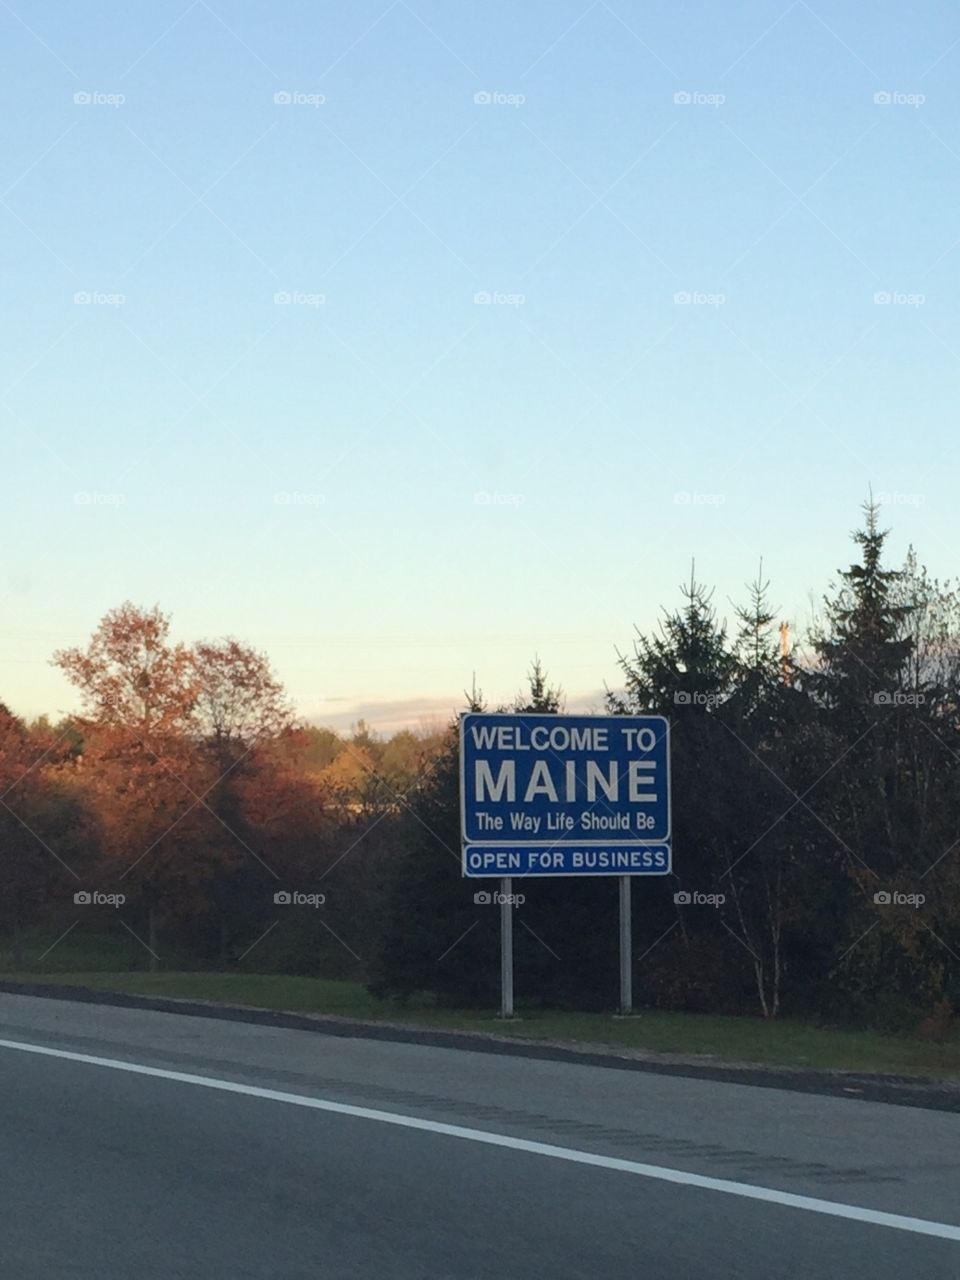 I snapped this picture when we crossed the Maine border, U-Haul in tow, headed to our new home and adventure